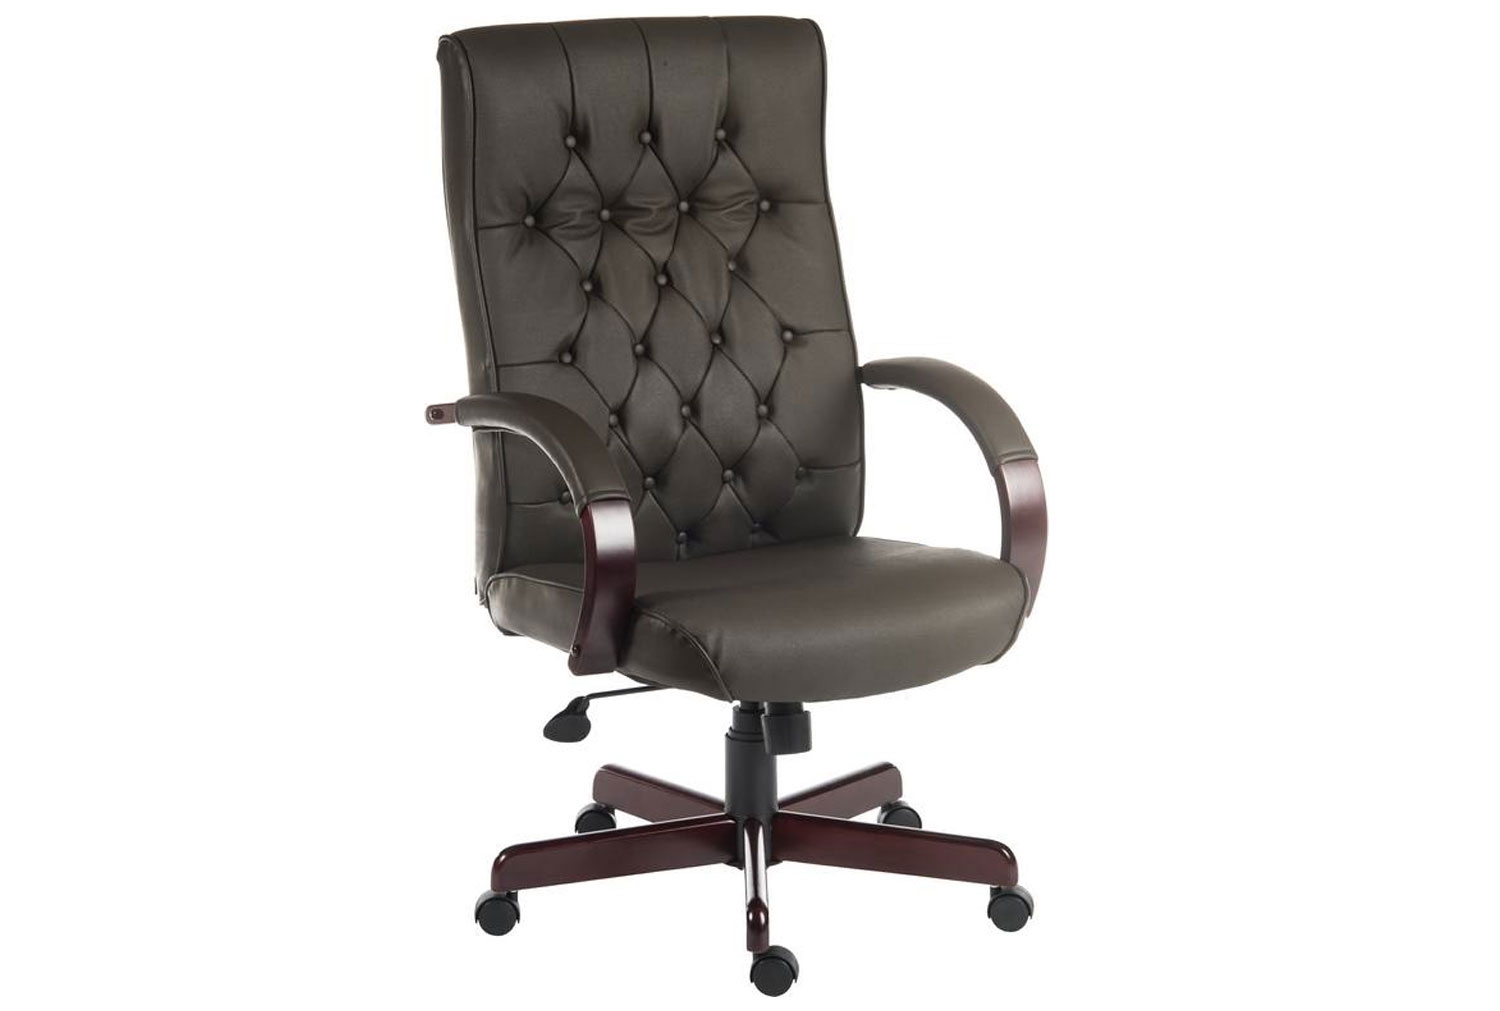 Warwick Leather Faced Executive Office Chair (Brown)